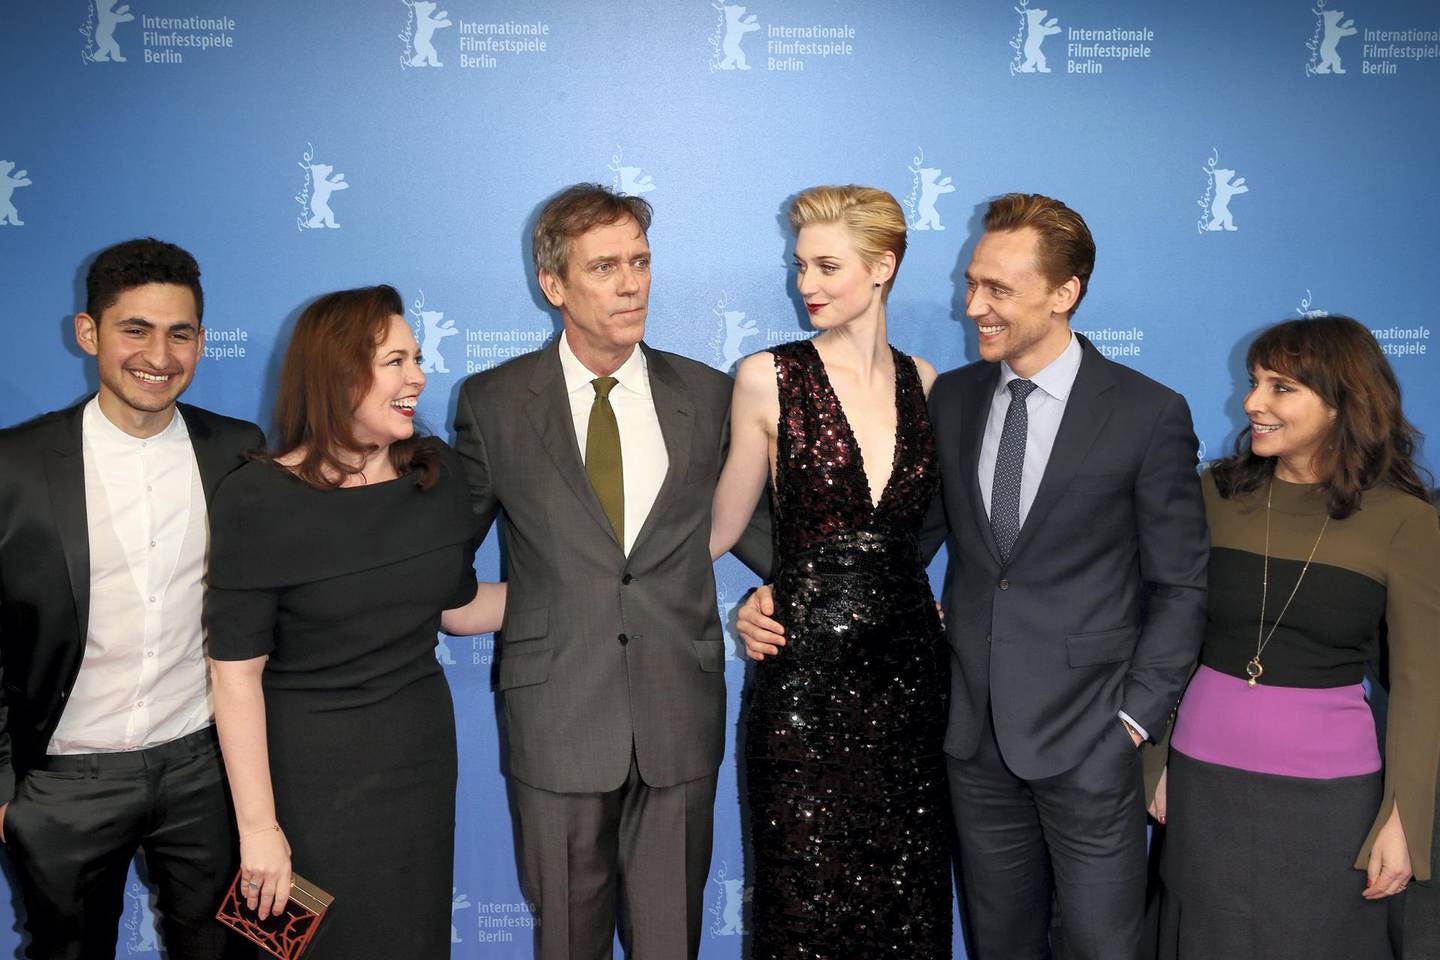 BERLIN, GERMANY - FEBRUARY 18:  (L-R) Actors Amir El-Masry, Olivia Colman, Hugh Laurie, Elizabeth Debicki, Tom Hiddleston and director Susanne Bier attend the 'The Night Manager' premiere during the 66th Berlinale International Film Festival Berlin at Haus der Berlinale on February 18, 2016 in Berlin, Germany.  (Photo by Andreas Rentz/Getty Images)